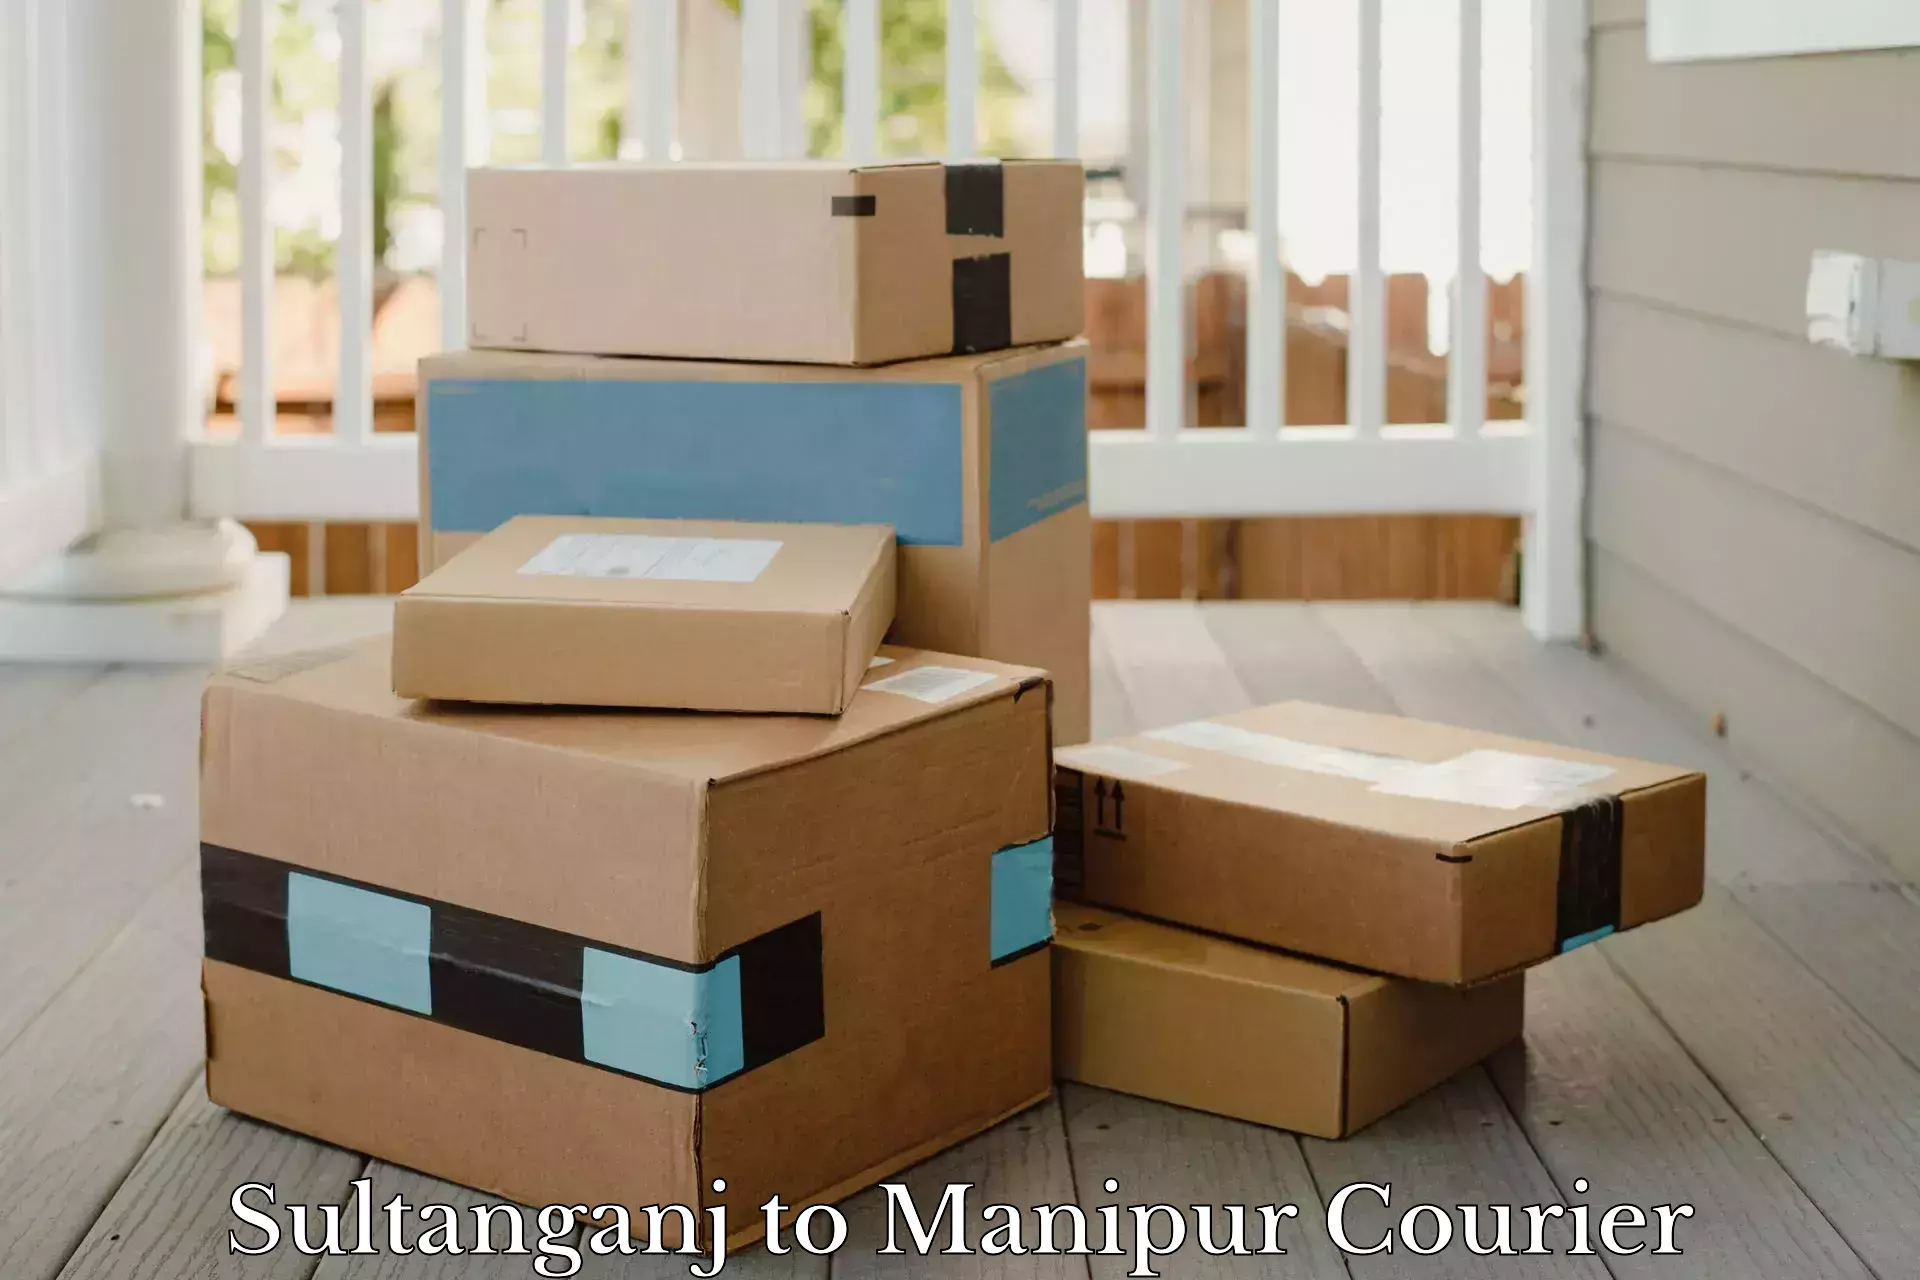 Supply chain delivery in Sultanganj to Manipur